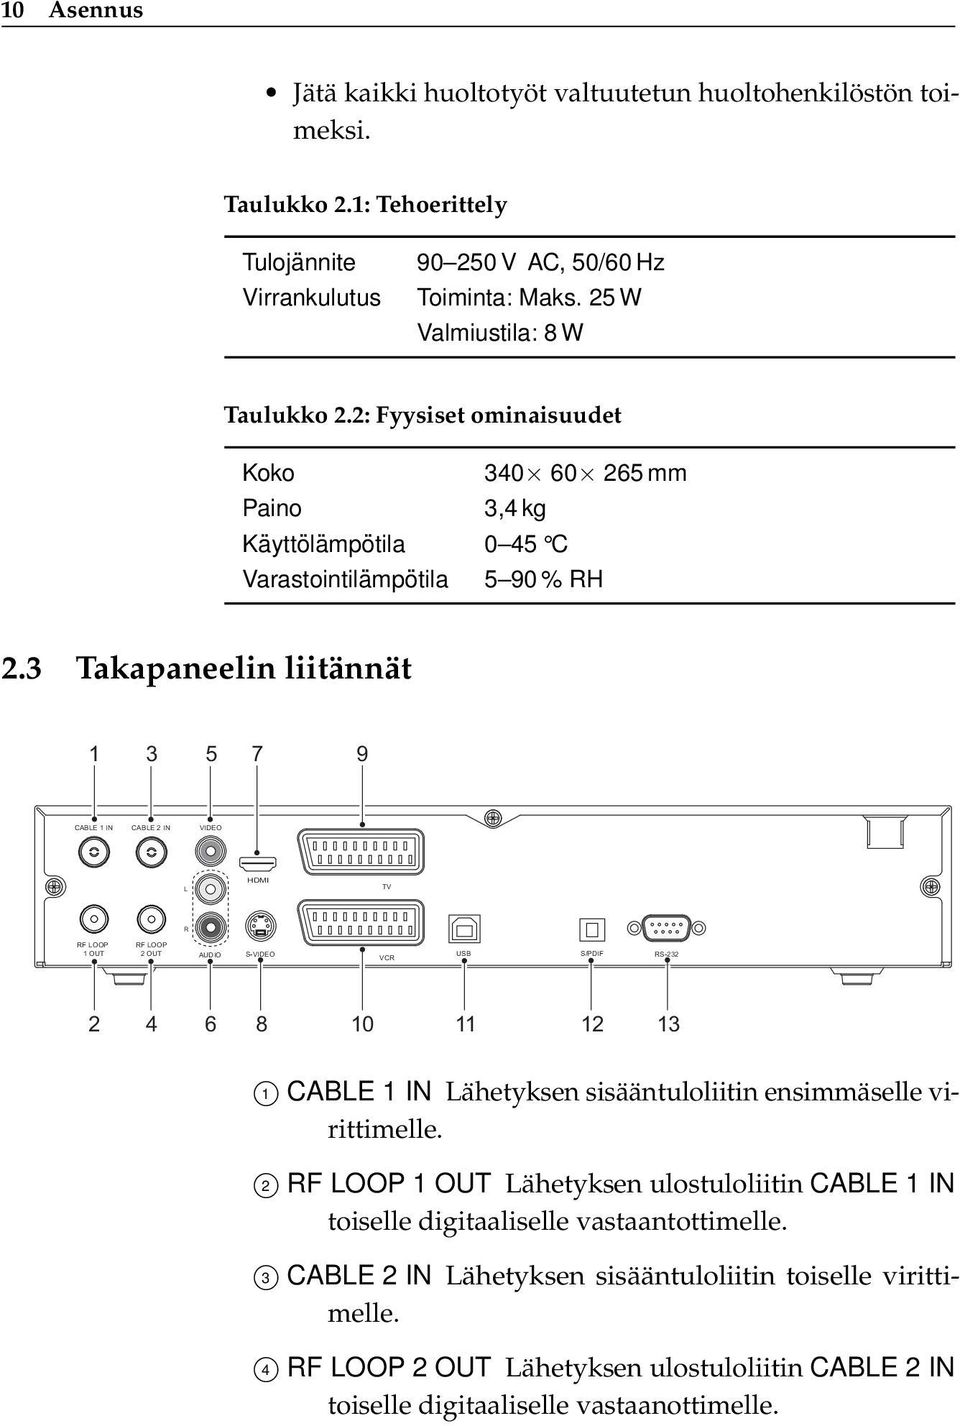 3 Takapaneelin liitännät 1 3 5 7 9 CABLE 1 IN CABLE 2 IN VIDEO L HDMI TV R RF LOOP 1 OUT RF LOOP 2 OUT AUDIO S-VIDEO VCR USB S/PDIF RS-232 2 4 6 8 10 11 12 13 1 CABLE 1 IN Lähetyksen